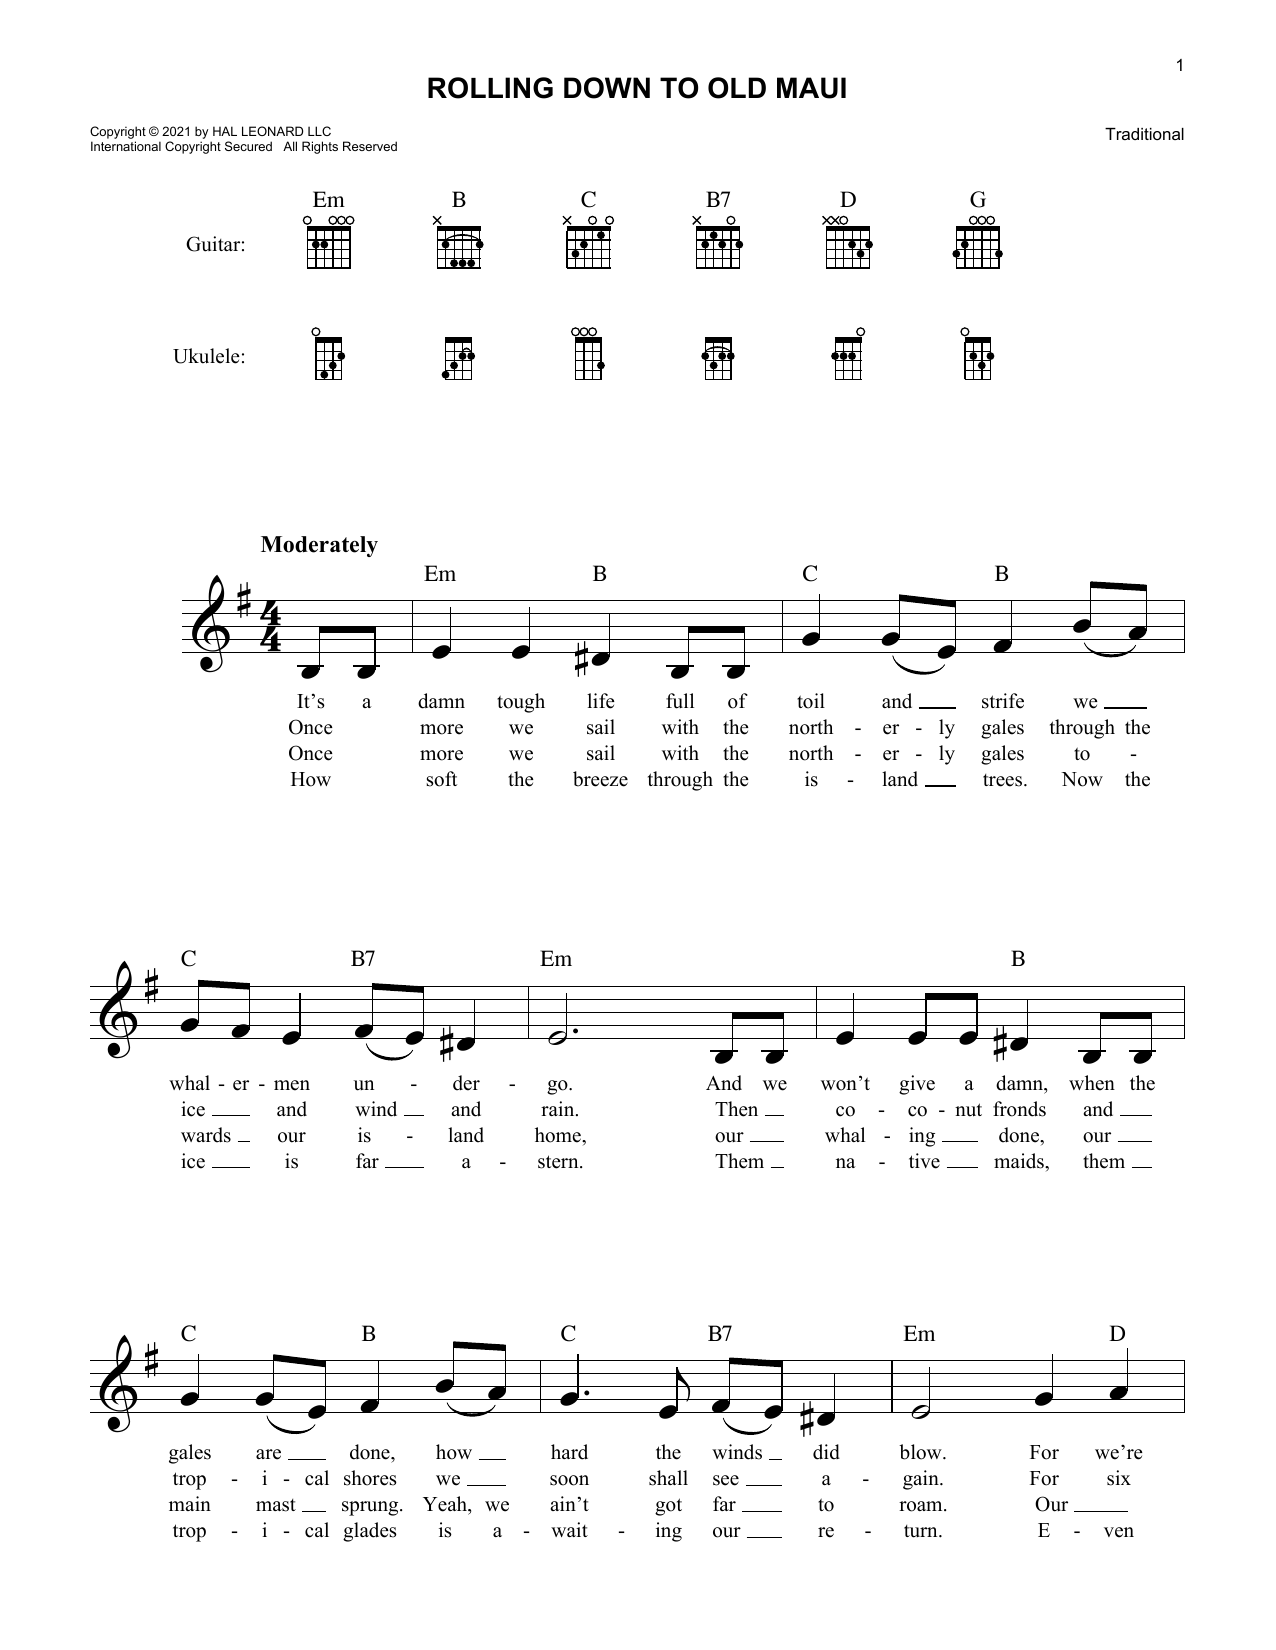 Download Traditional Rolling Down To Old Maui Sheet Music